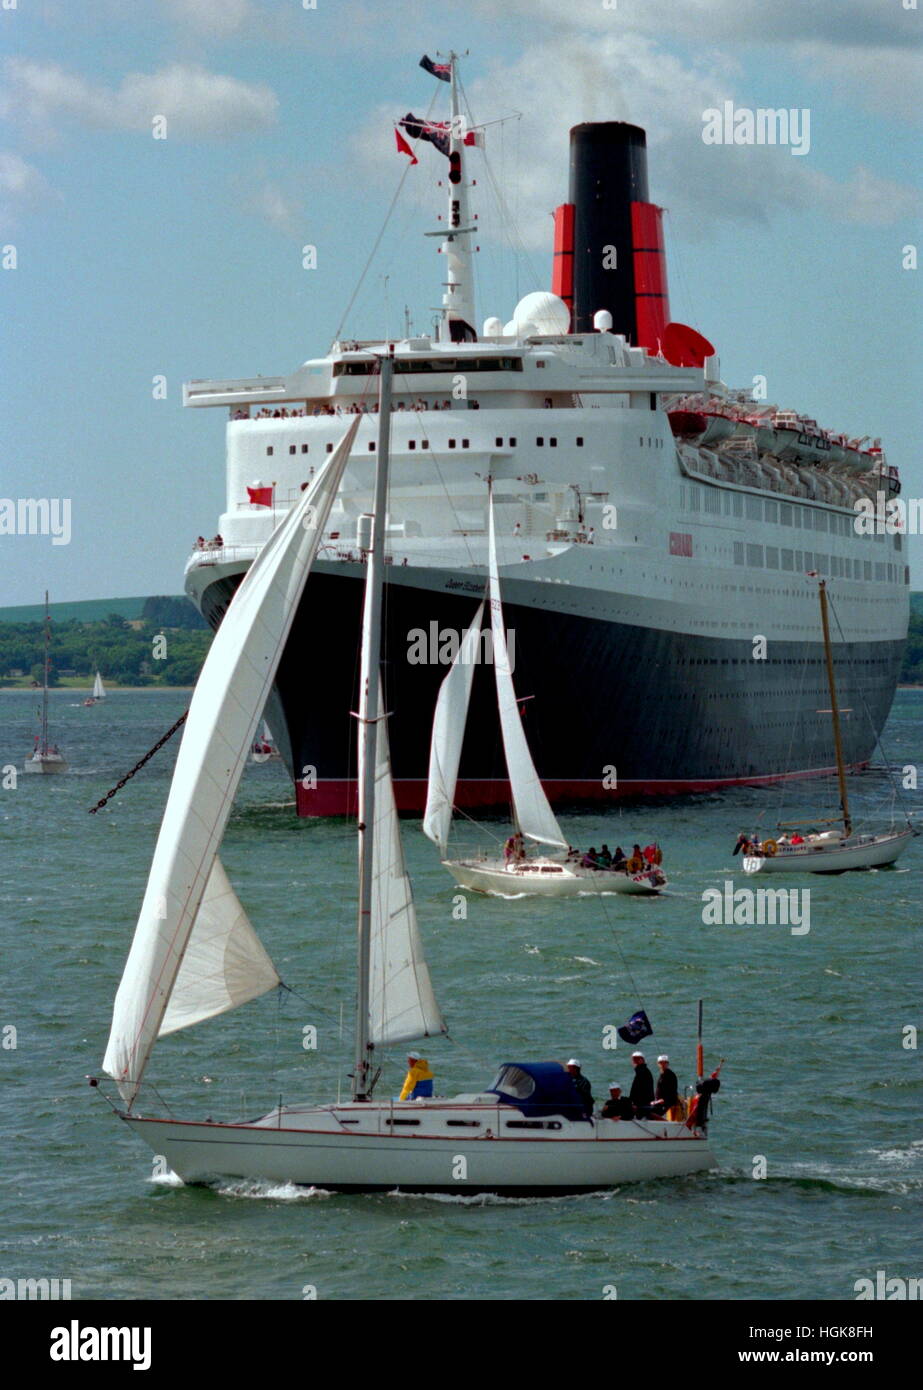 AJAXNETPHOTO. 5TH JUNE, 1994. SPITHEAD, ENGLAND. - 50TH D-DAY ANNIVERSARY FLEET - THE CUNARD LINER QUEEN ELIZABETH 2, ONE OF SEVERAL MERCHANT VESSELS ON REVIEW. PHOTO;JONATHAN EASTLAND/AJAX REF:940506 8 Stock Photo